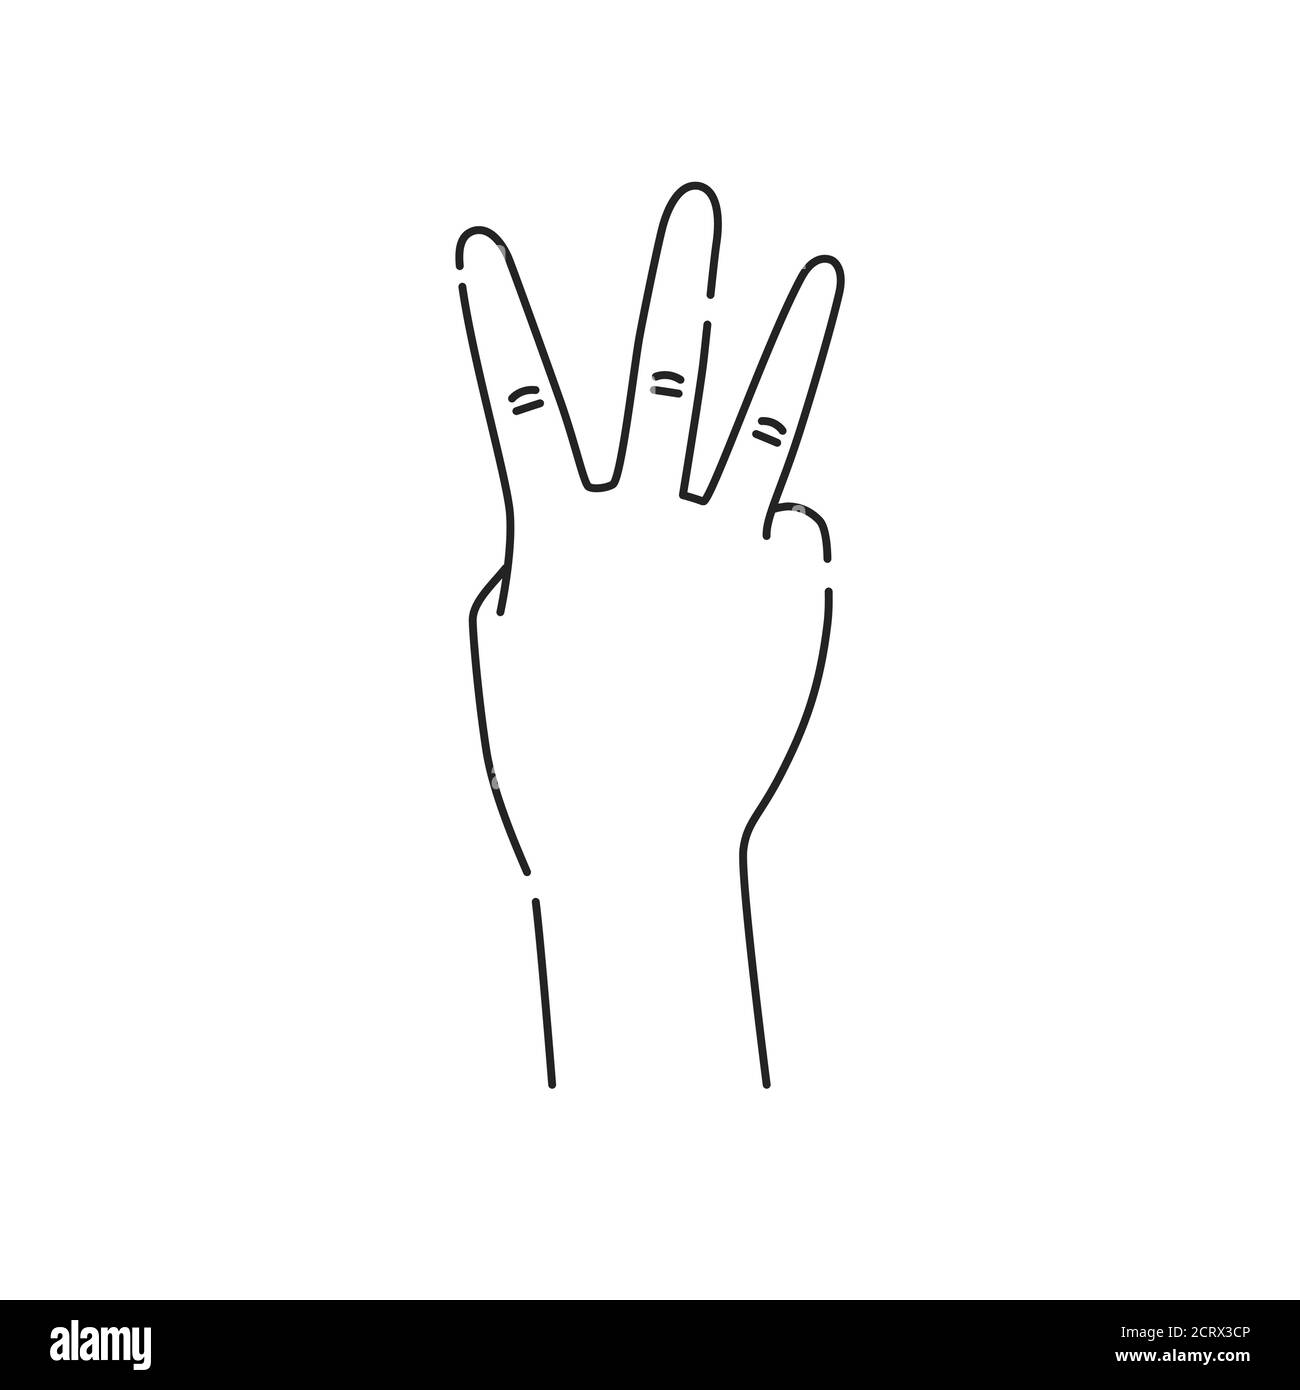 Three fingers gesture line black icon. Make fingers up gesture sketch element. Pictogram for web page, mobile app, promo. Editable stroke. Hand drawn Stock Vector